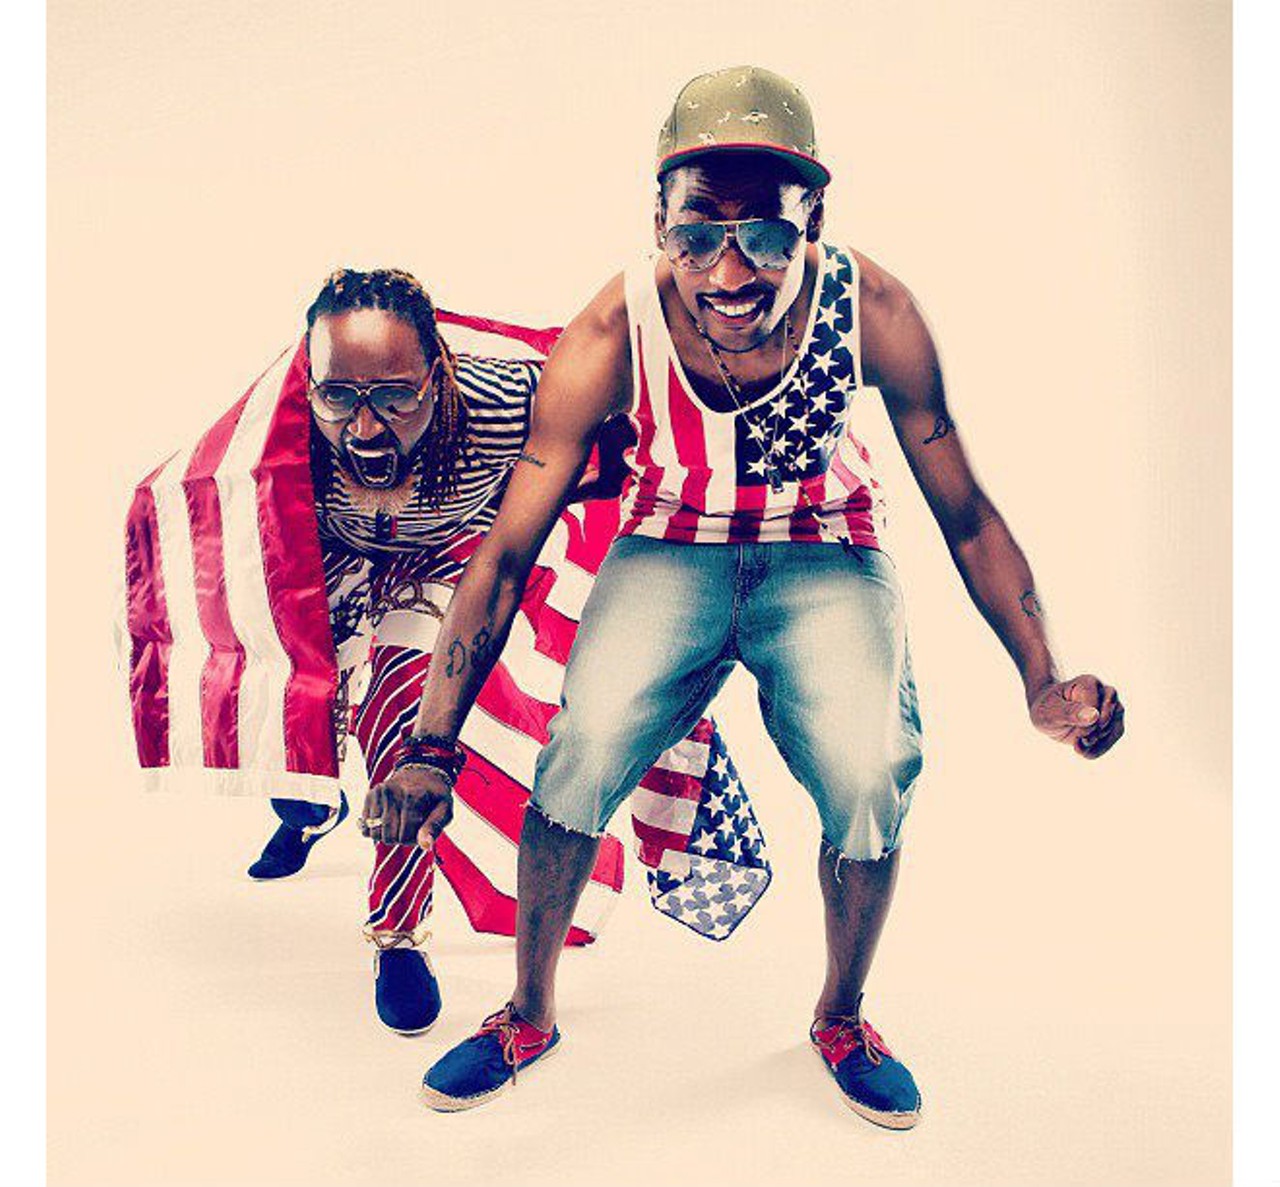 Wednesday, July 23Mac and Cheese Three Year Anniversary Party featuring the Ying Yang TwinsYing Yang Twins perform.